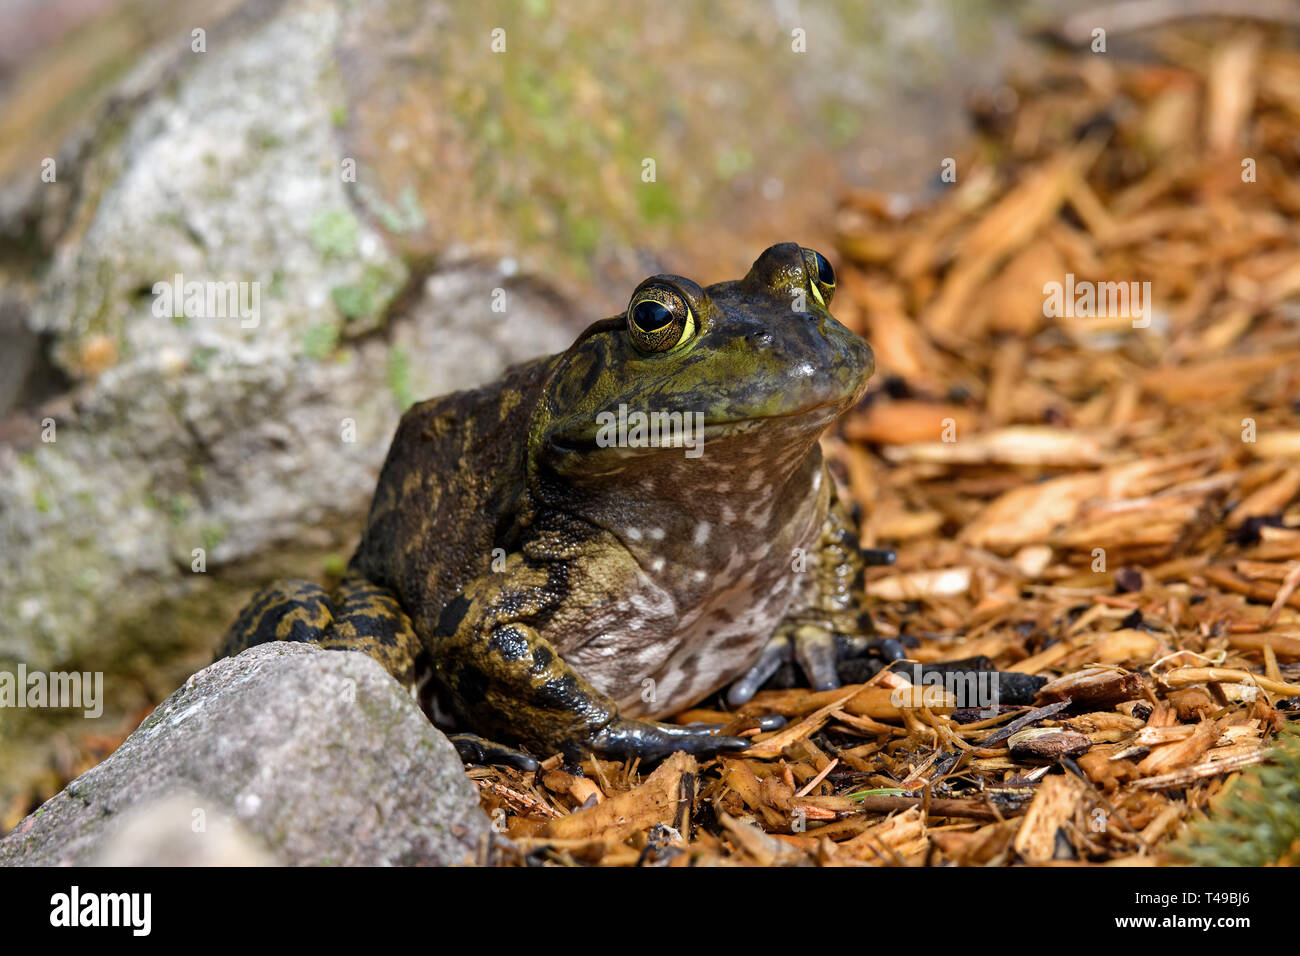 American bullfrog sitting at ponds edge in early morning sun. It is an amphibious frog, and a member of the family Ranidae. Stock Photo